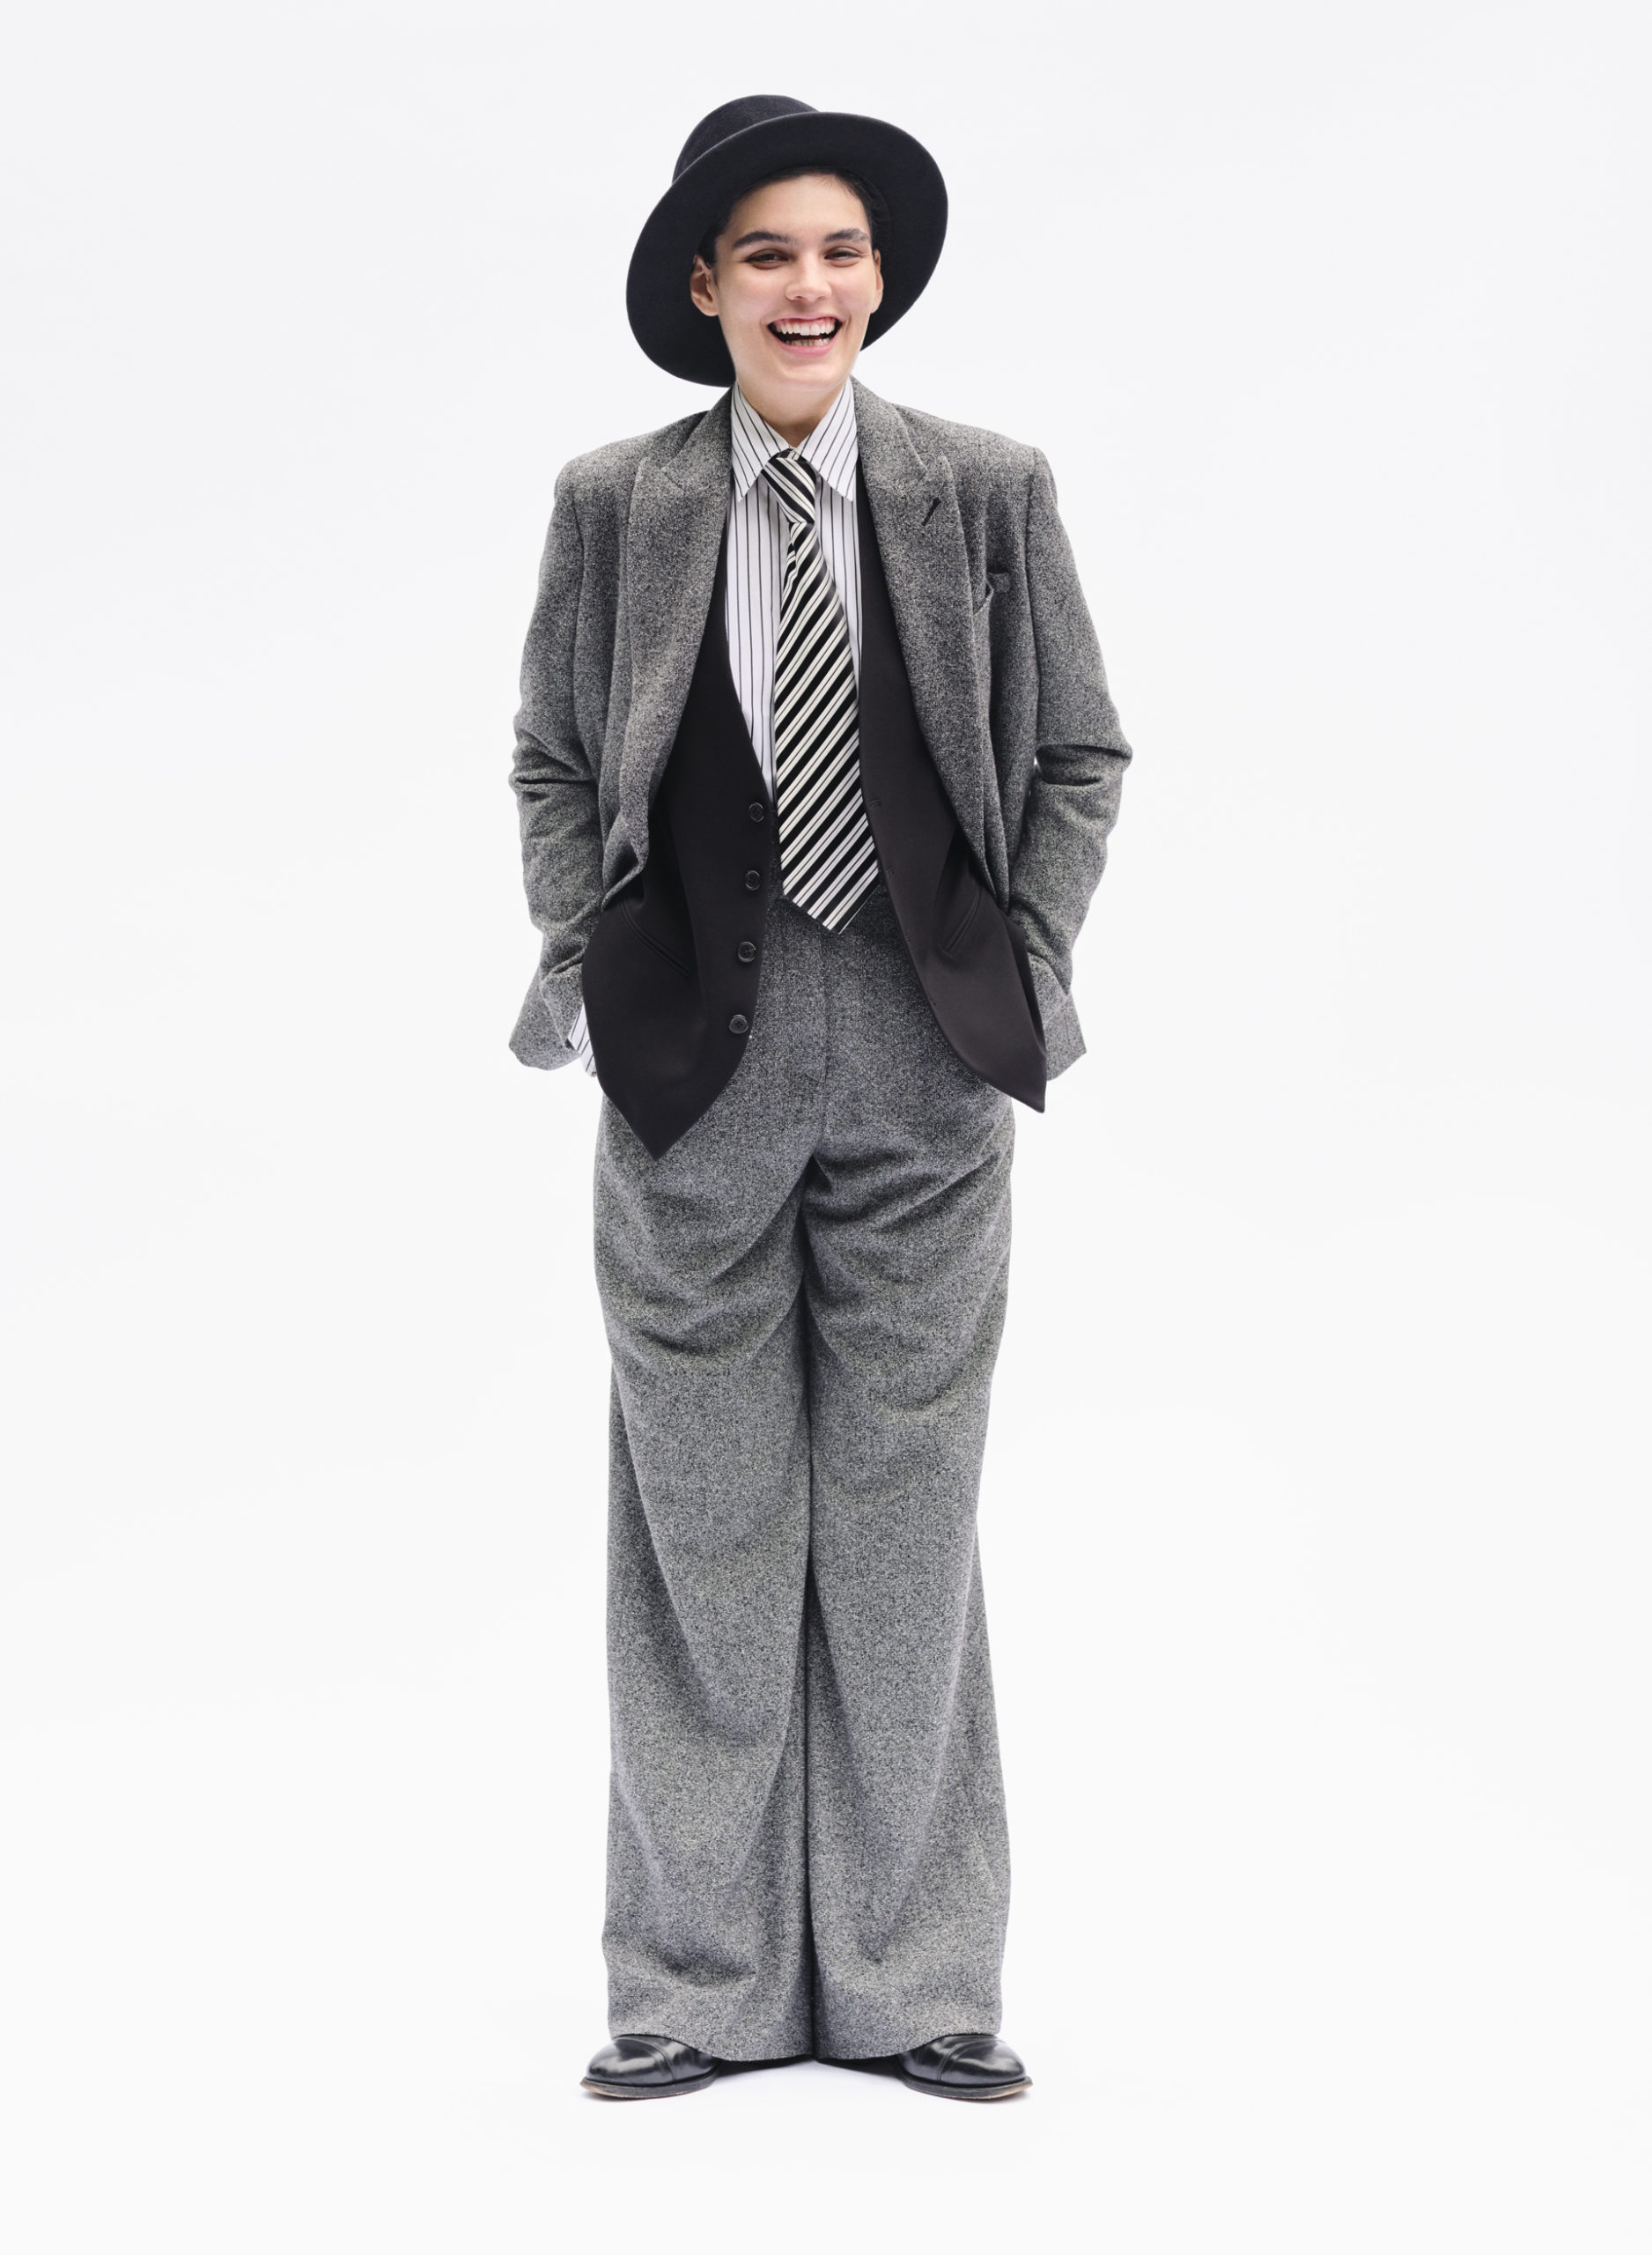  Jacket and pants <strong>Emporio Armani</strong>, Vest and hat <strong>Ann Demeulemeester</strong>, Shirt and tie <strong>Charvet</strong>, Shoes <strong>Church’s</strong>